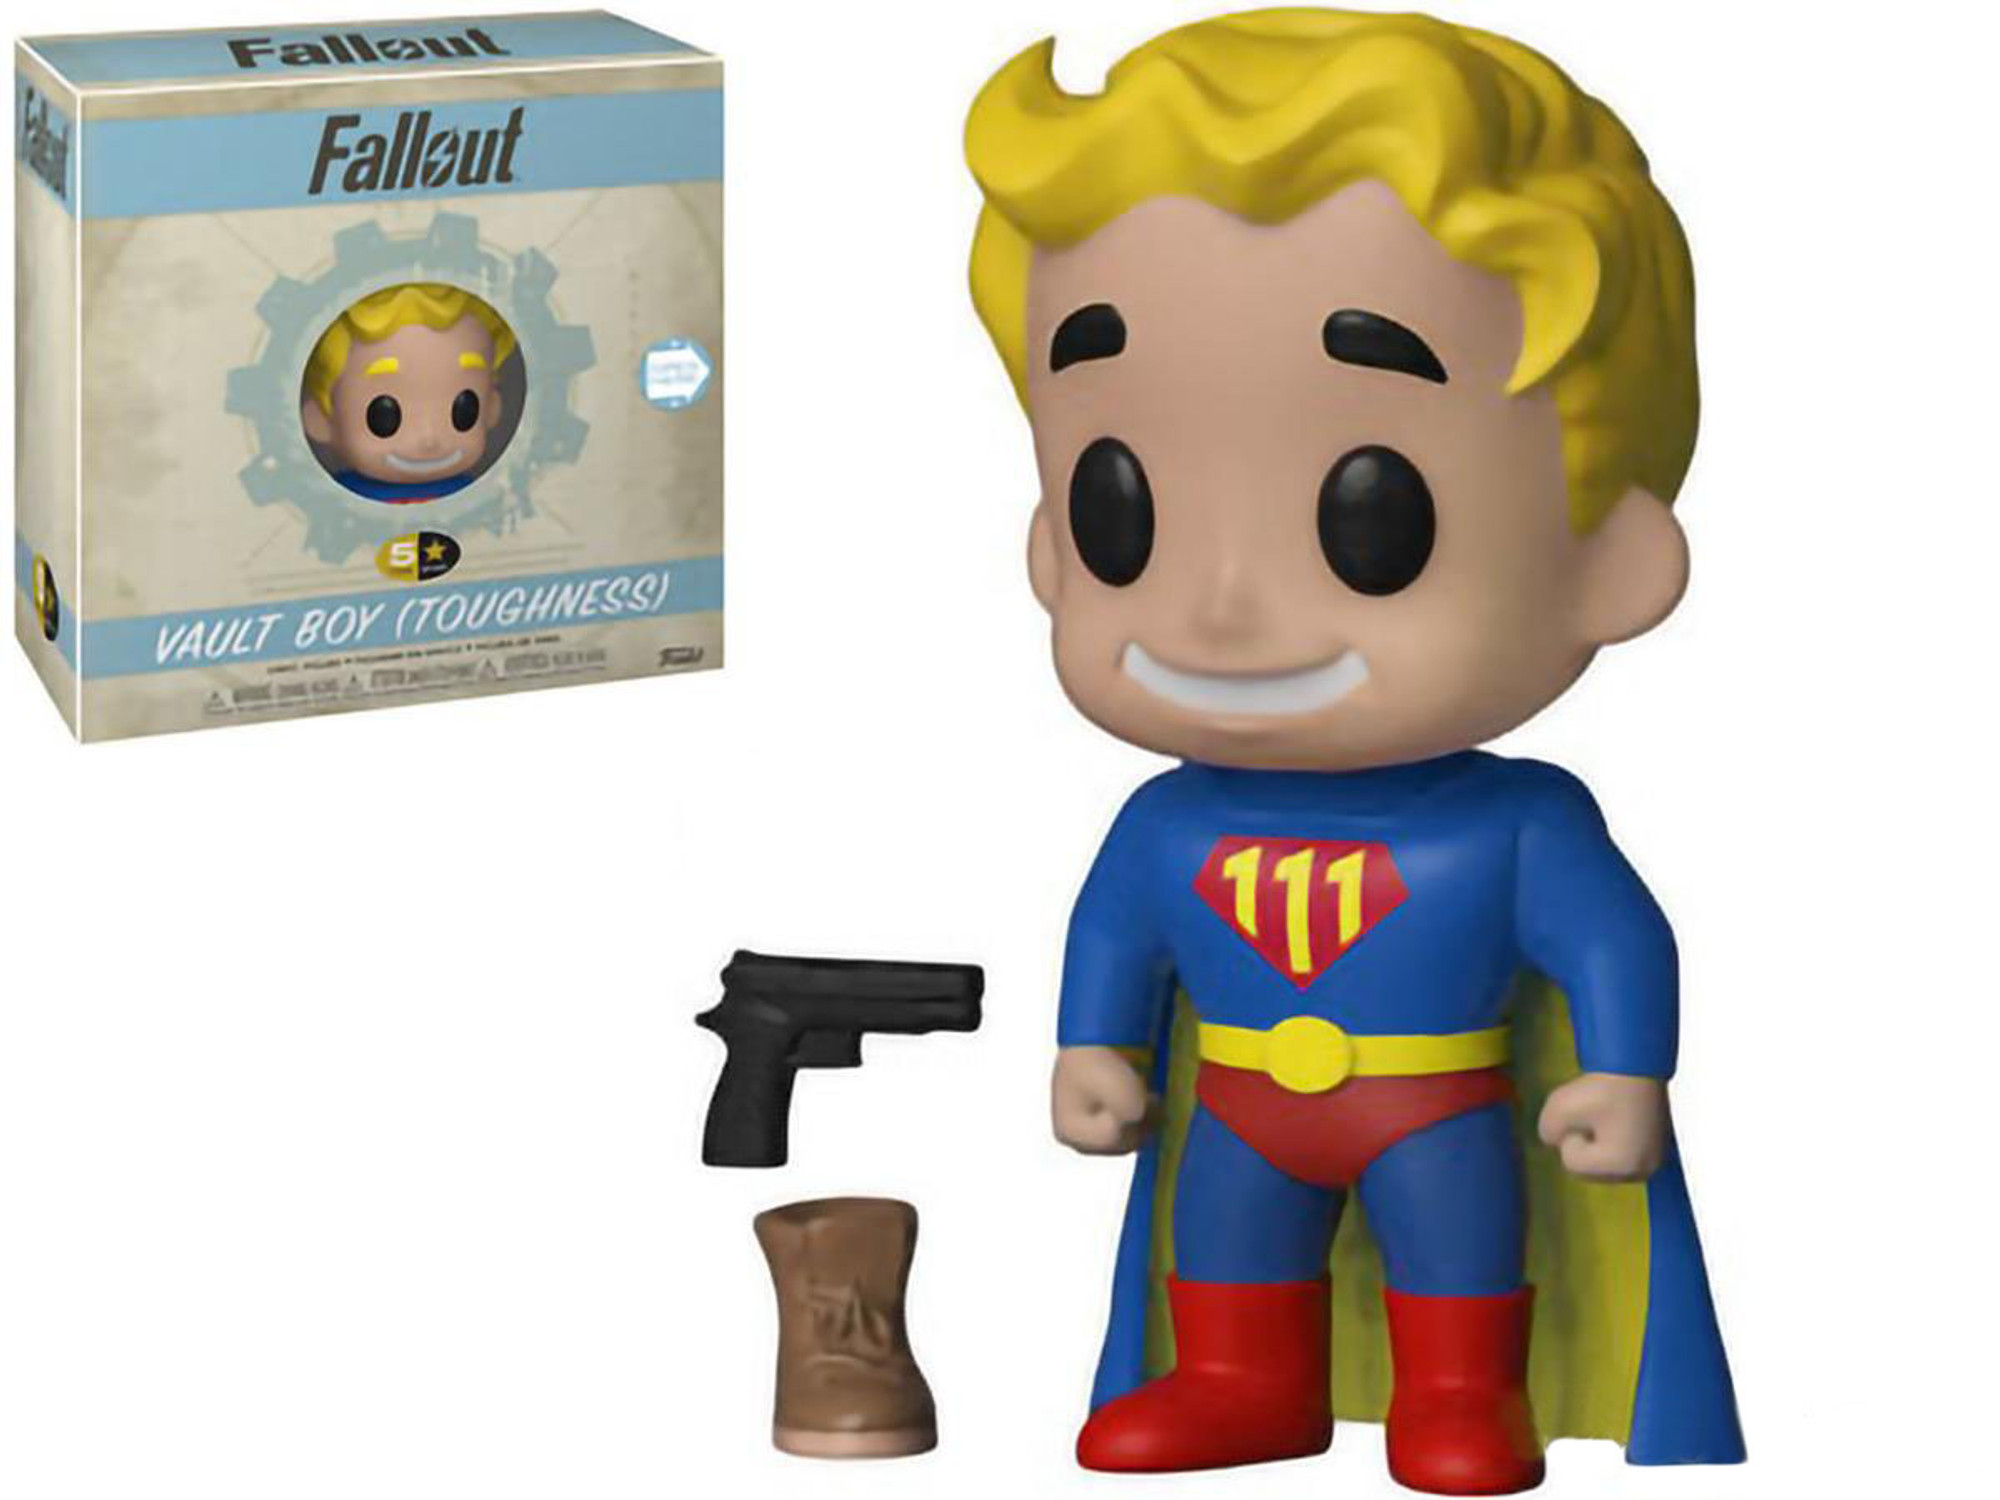 5 Star Fallout Vault Boy Vinyl Figure by Funko (Type: Toughness)